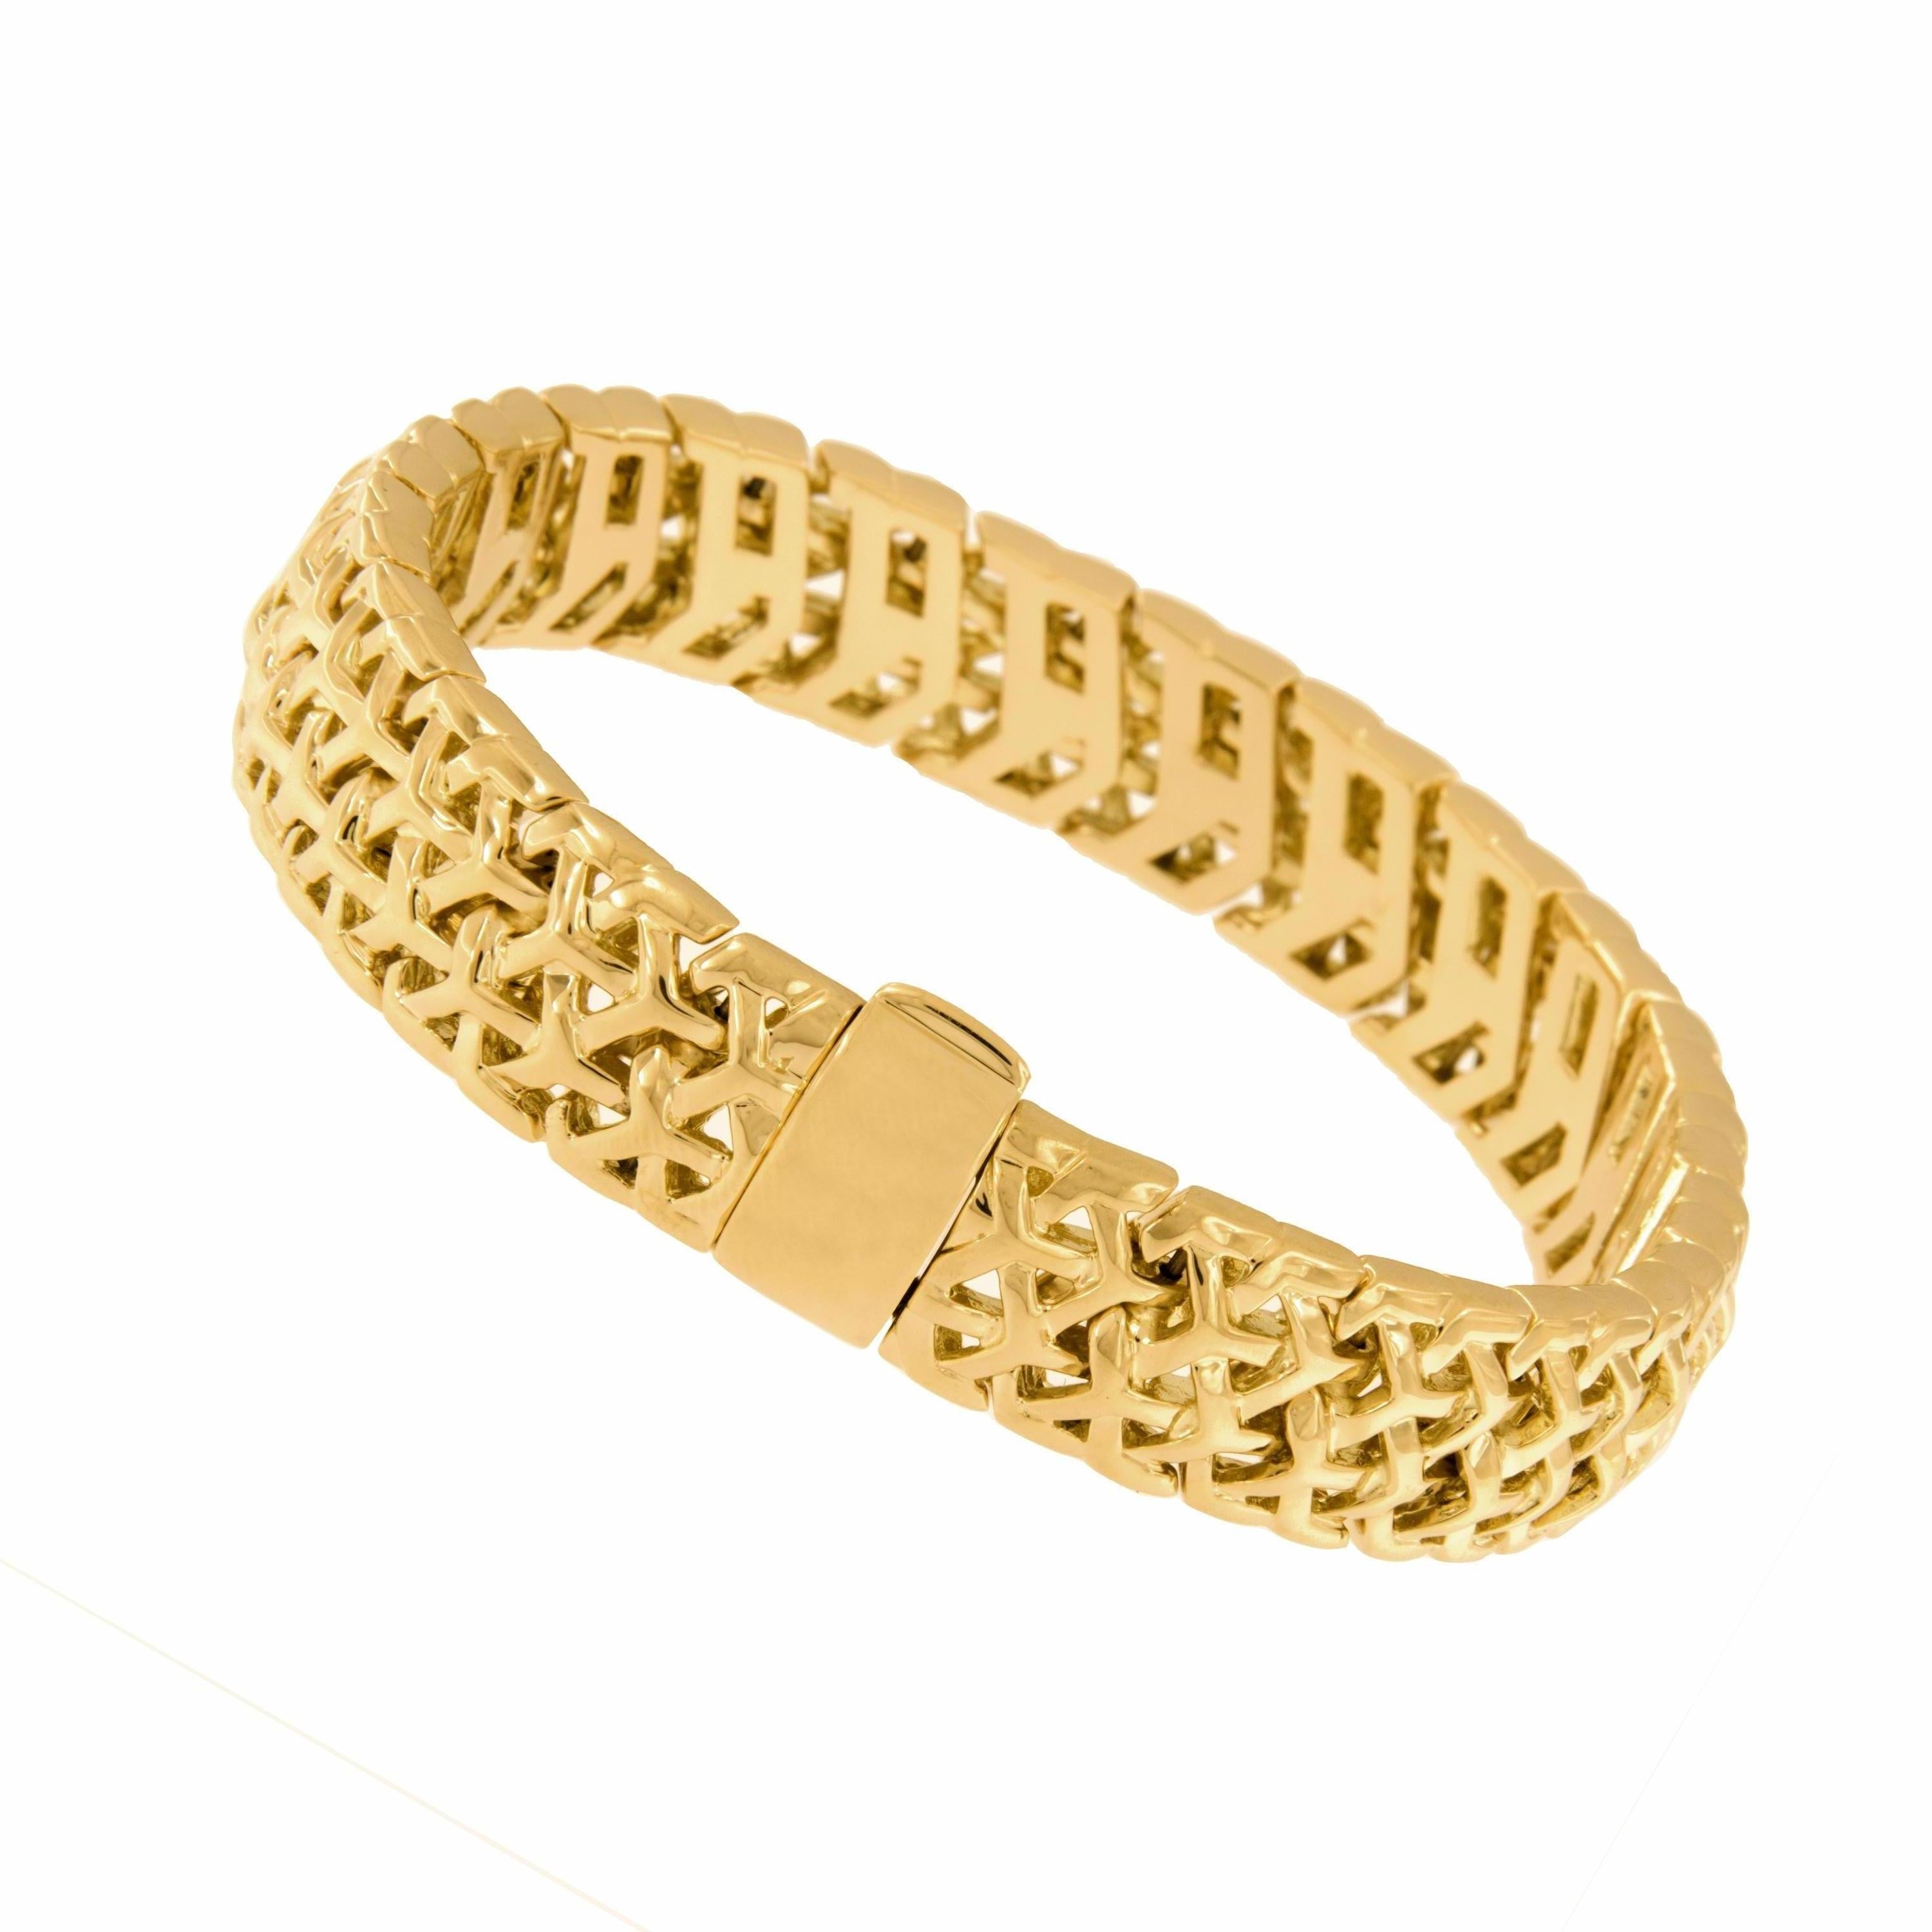 daily wear gold bracelet designs images for ladies